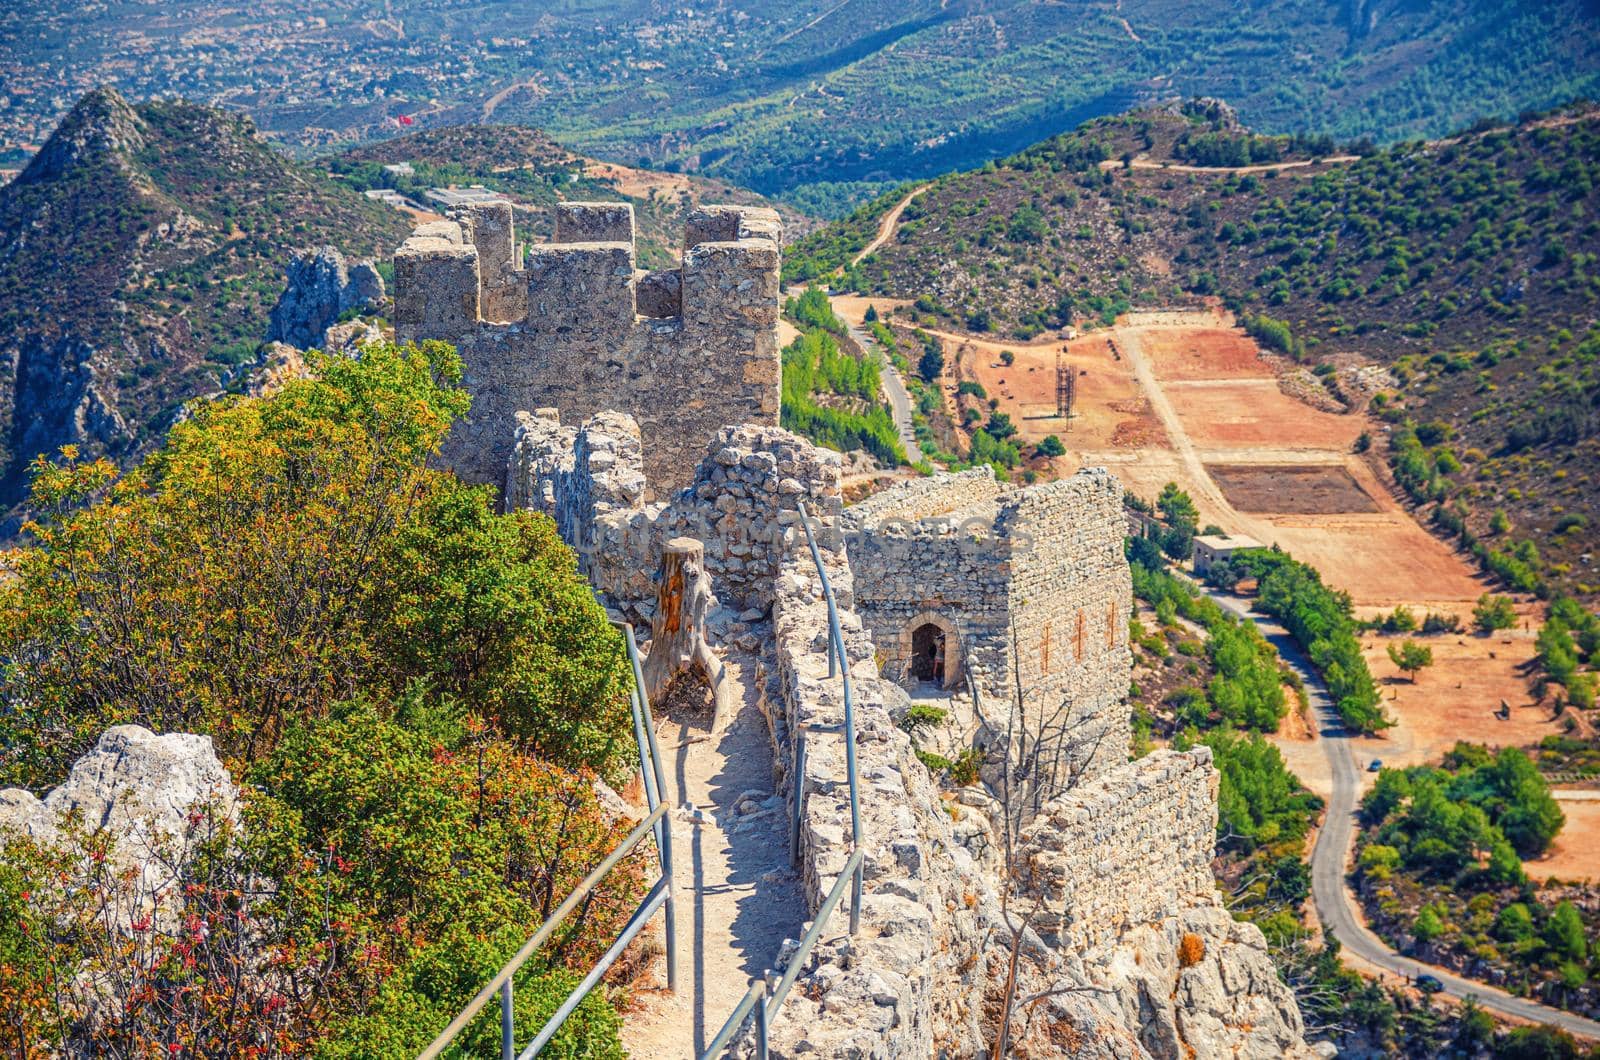 Saint Hilarion Castle medieval building with stone walls and tower in Kyrenia Girne mountains, Northern Cyprus